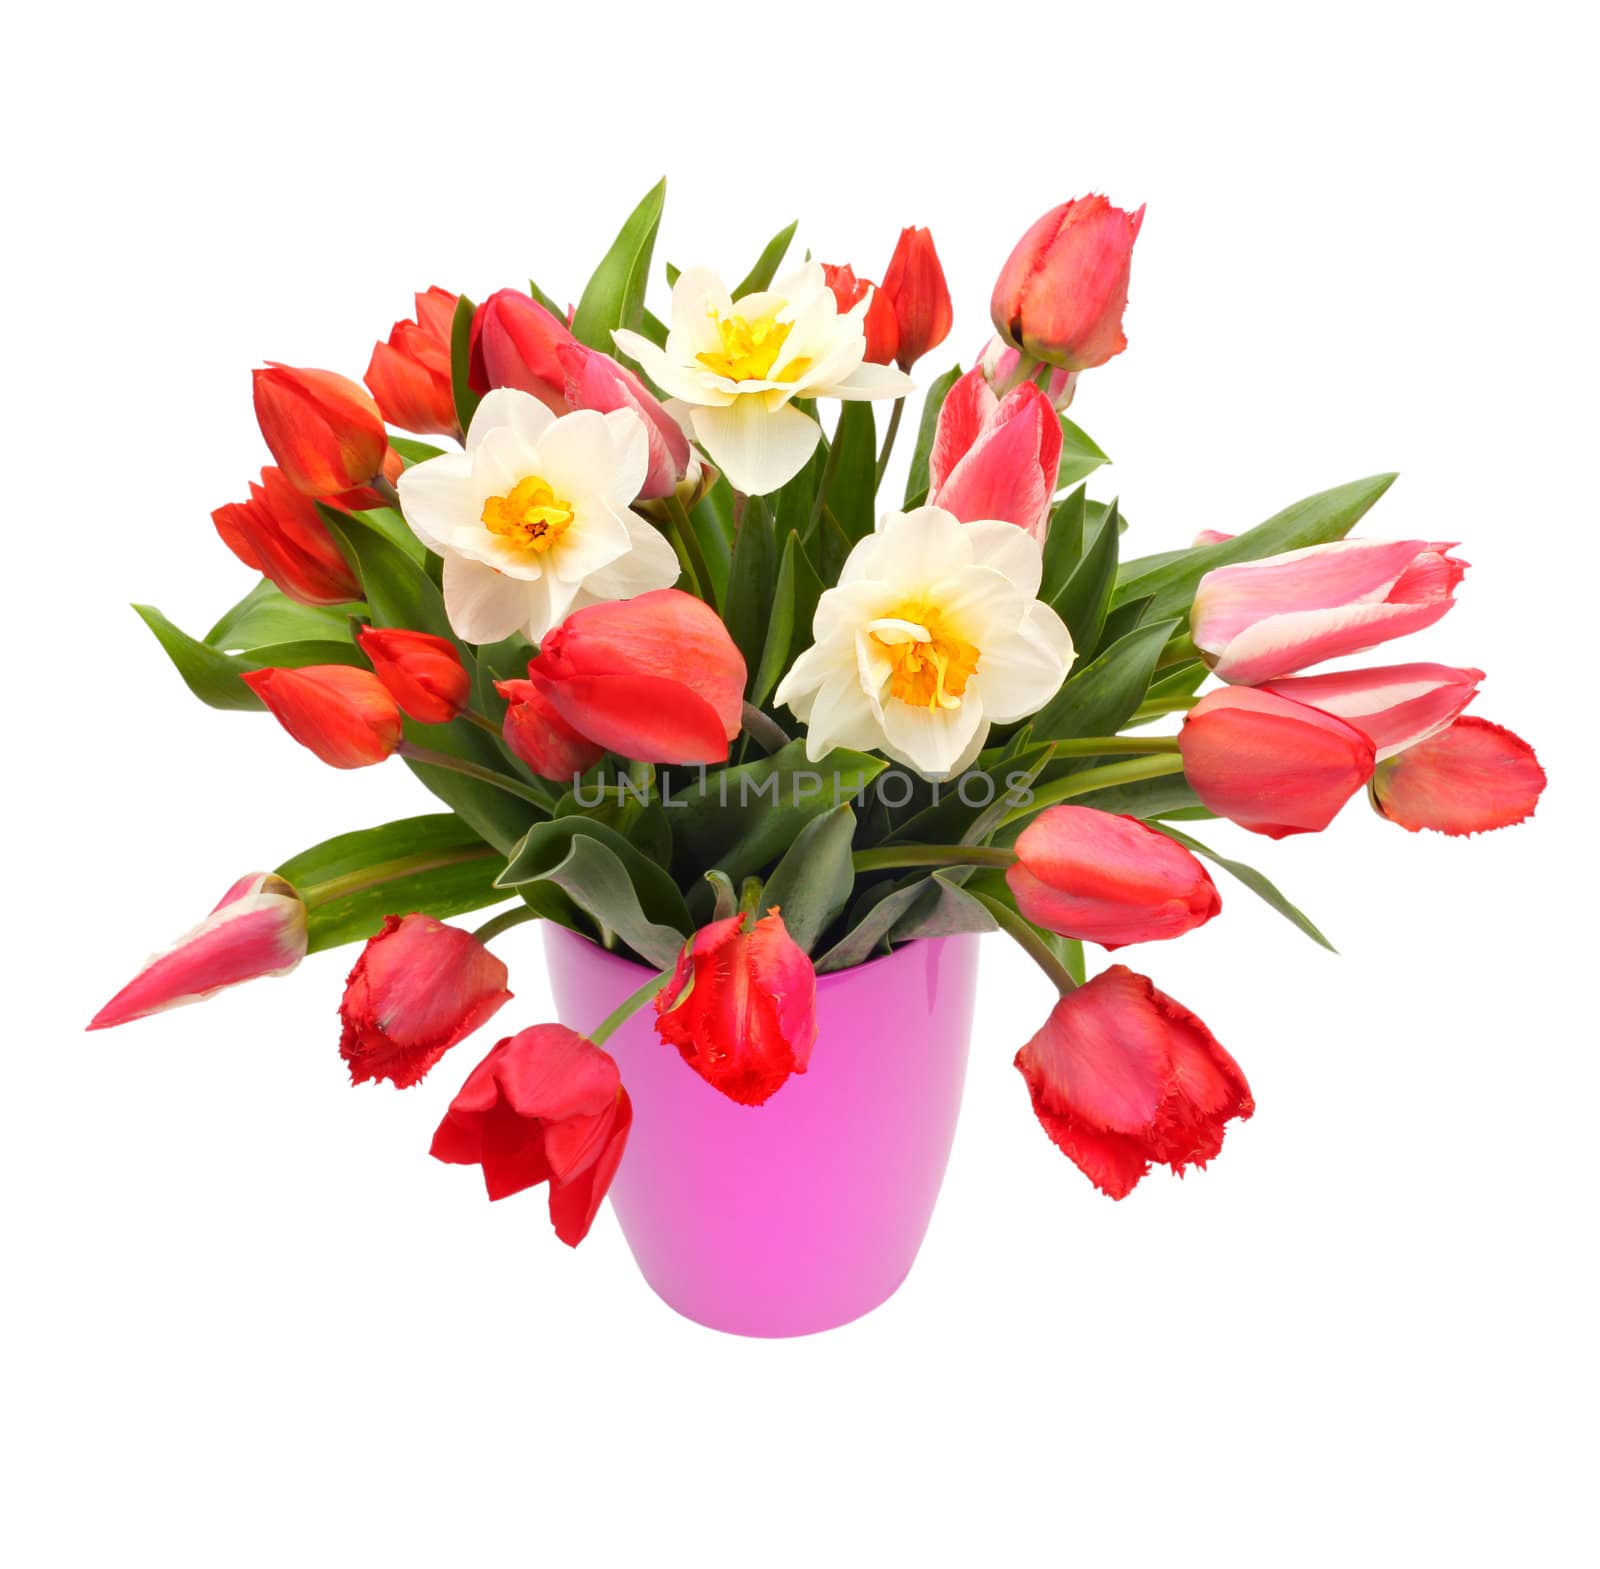 bouquet of tulips and narcissus flowers